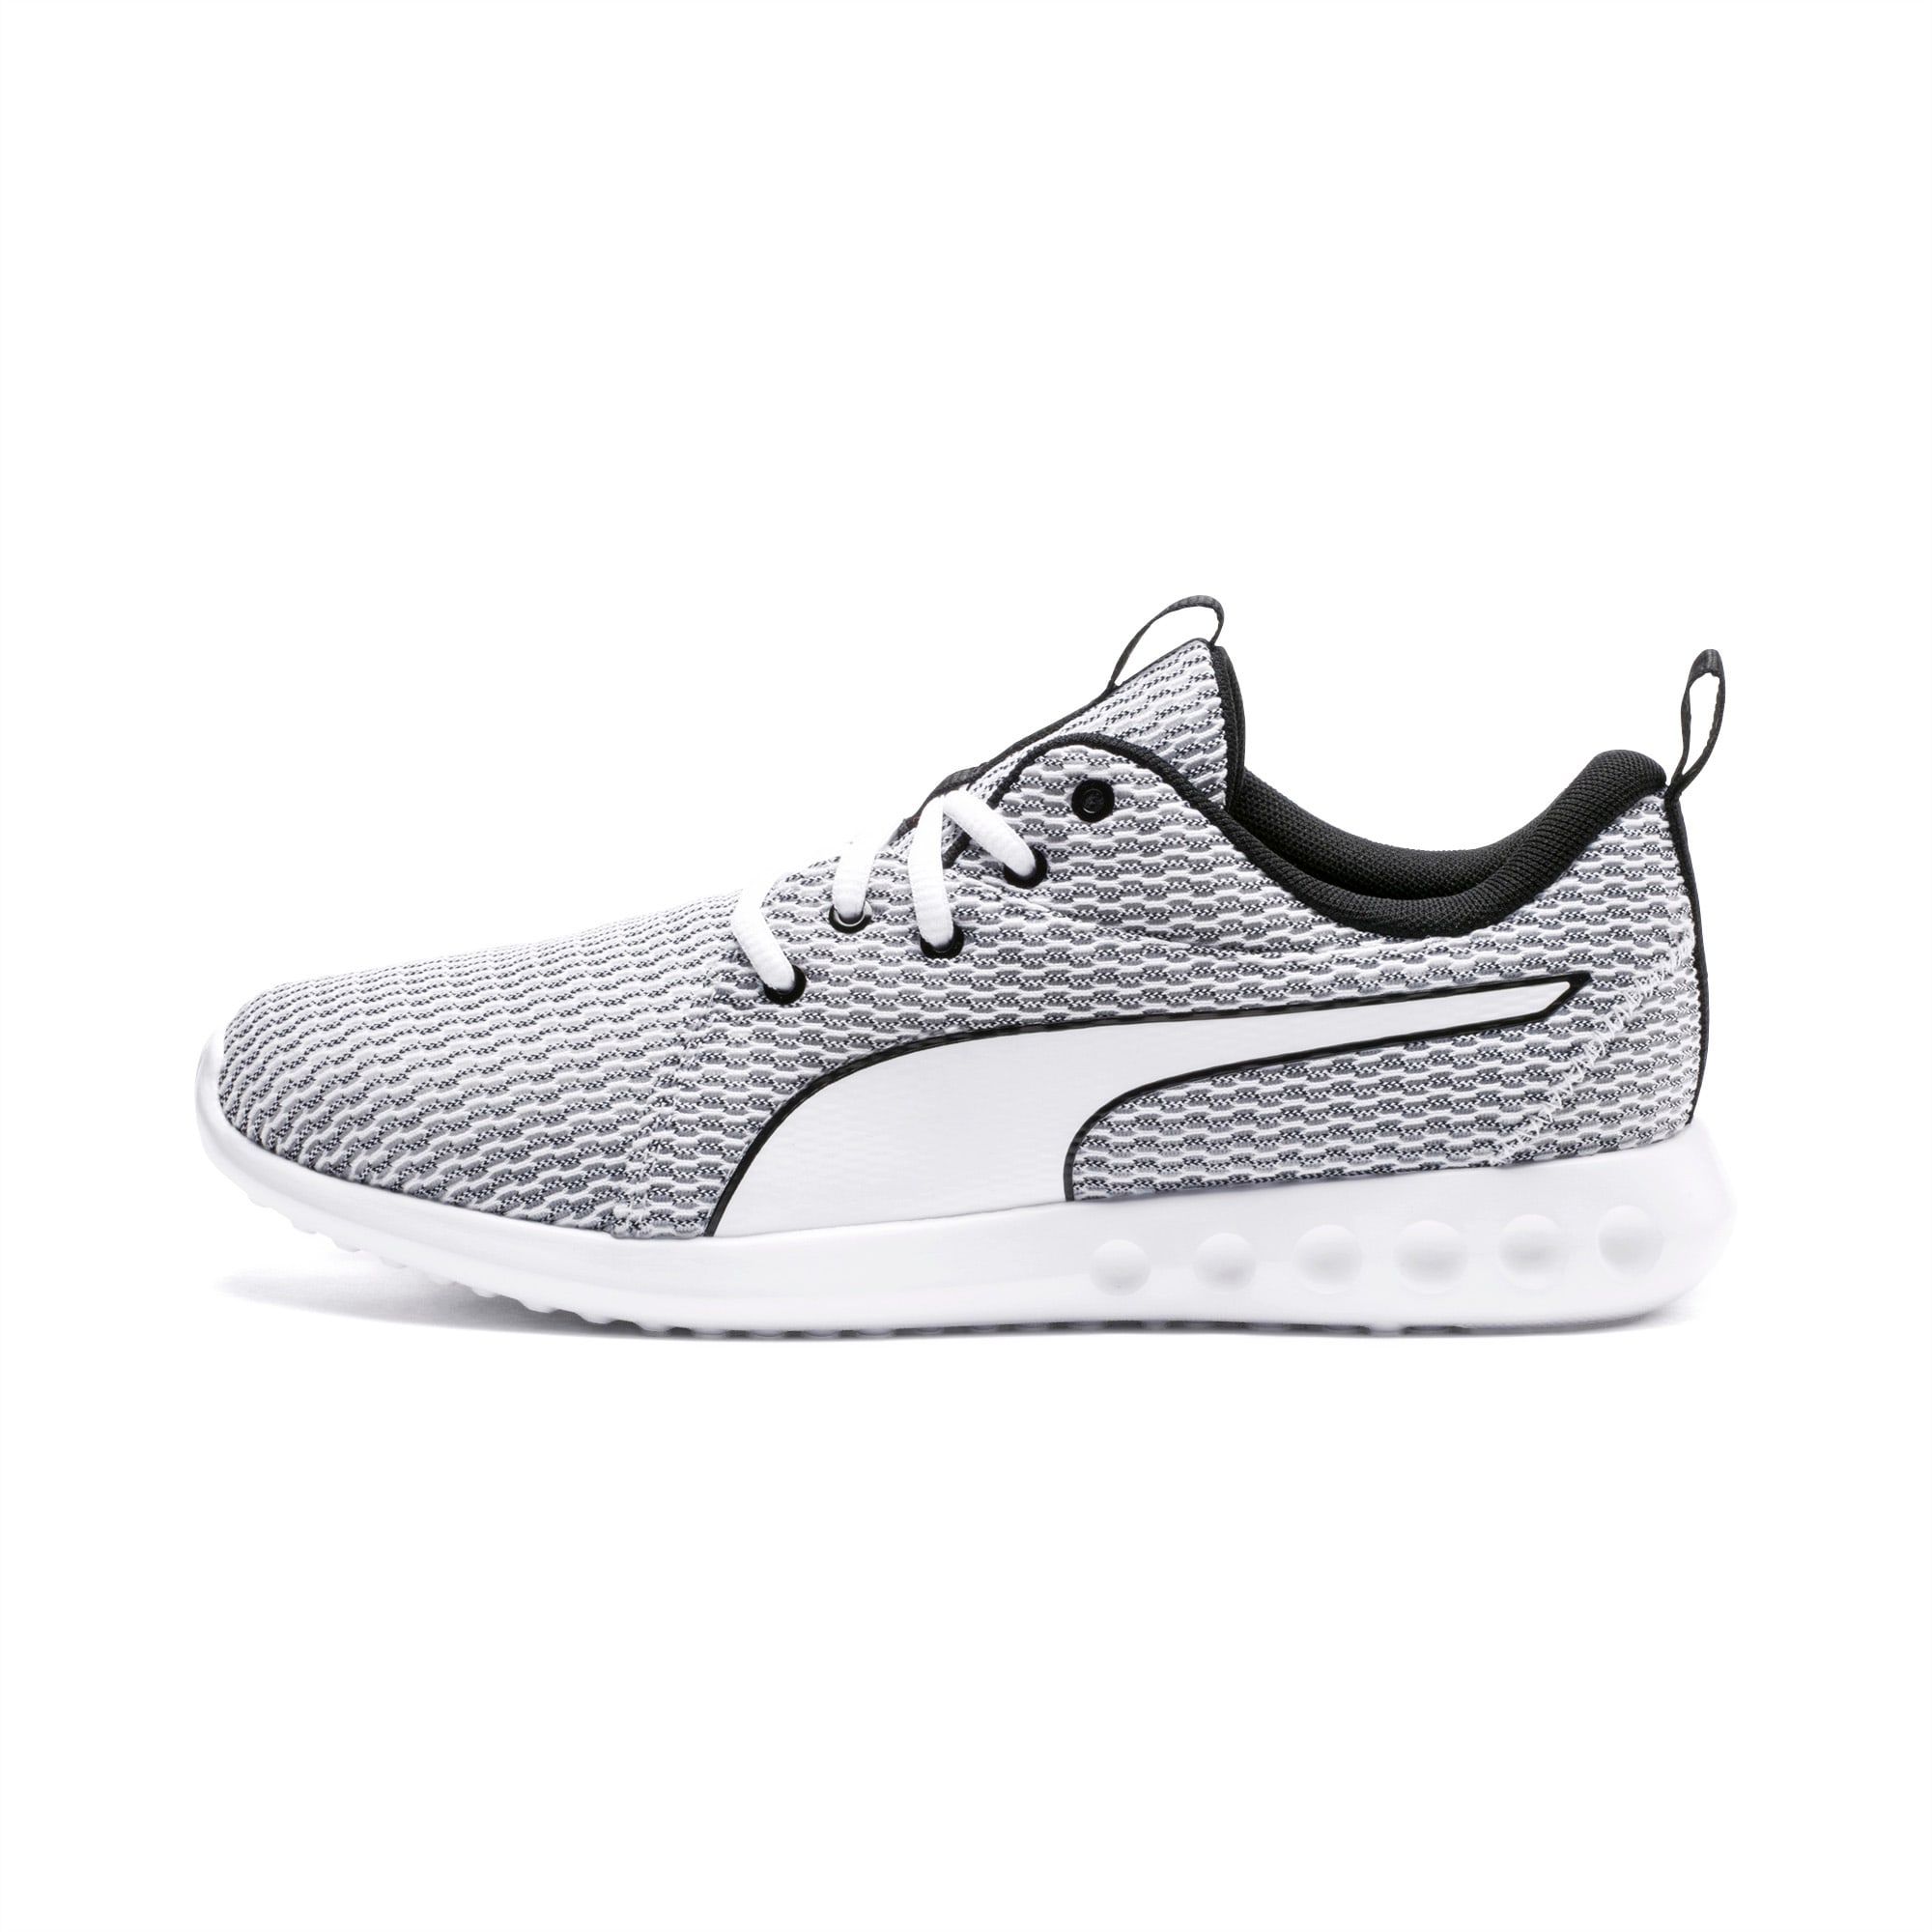 mens white athletic shoes